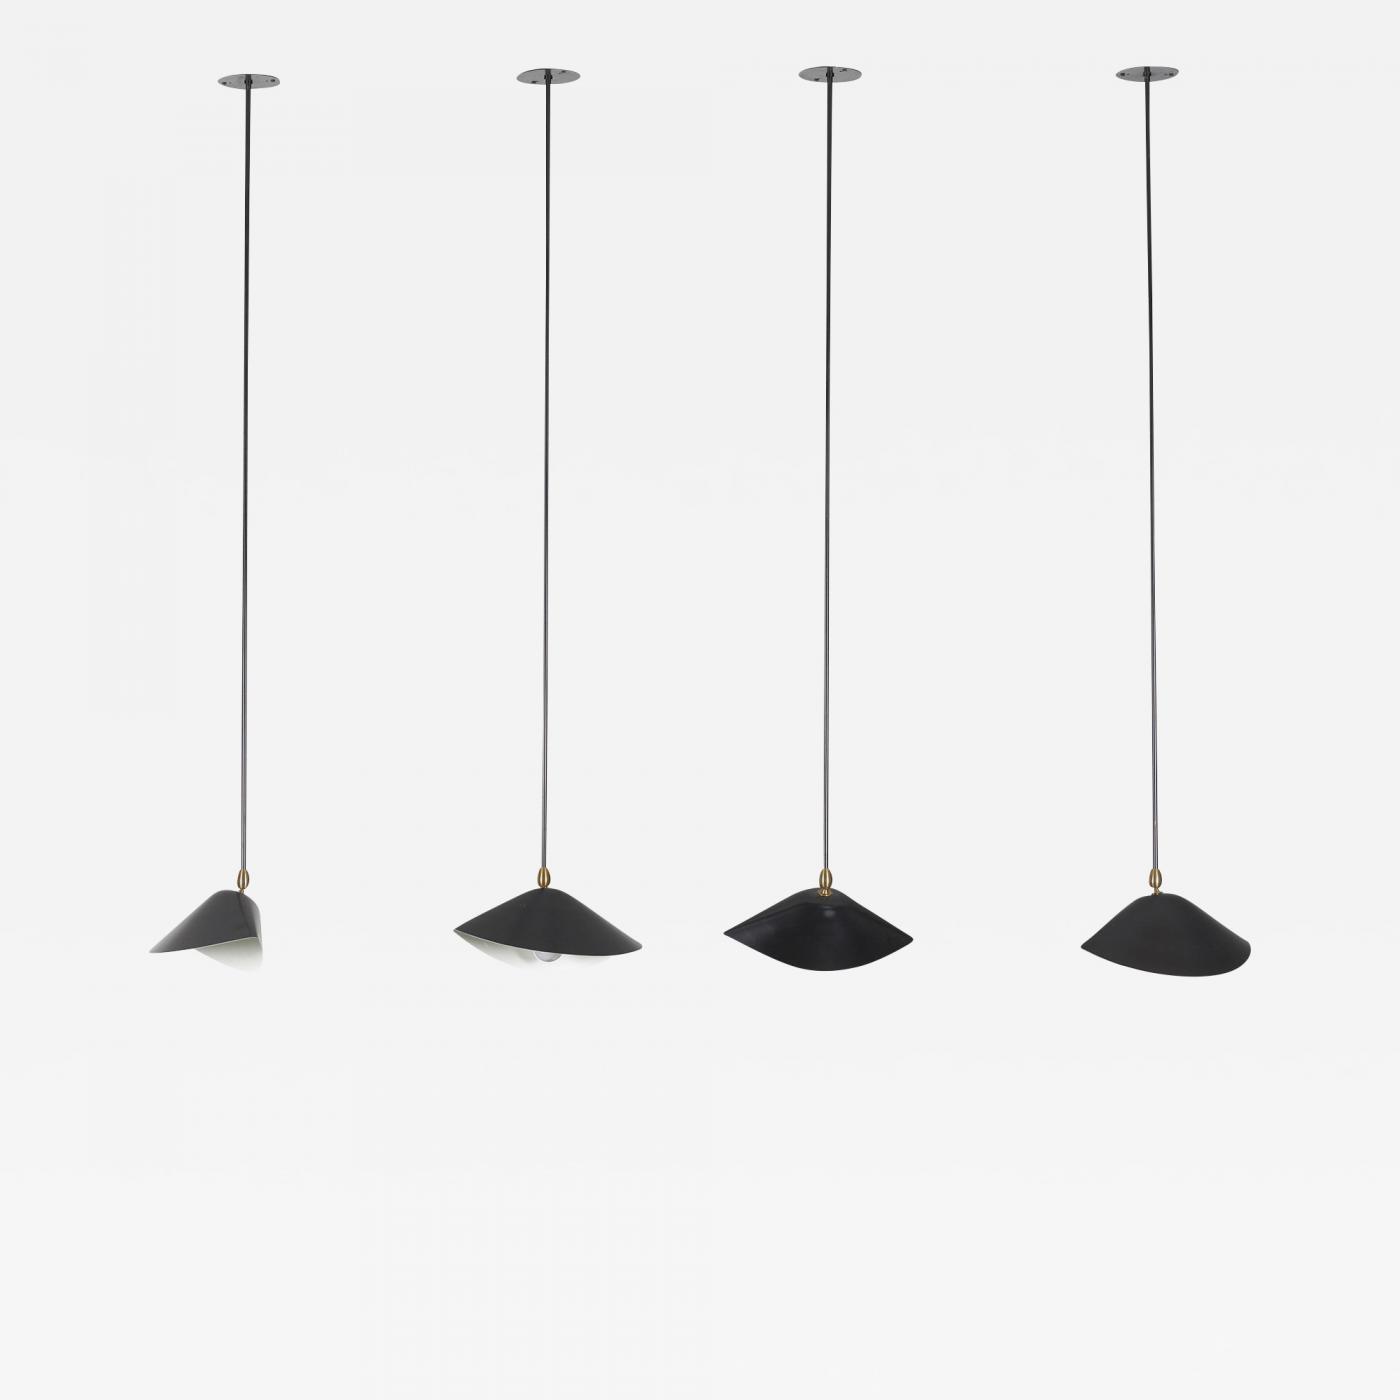 Serge Mouille Serge Mouille Mcl Lib Library Ceiling Lamp